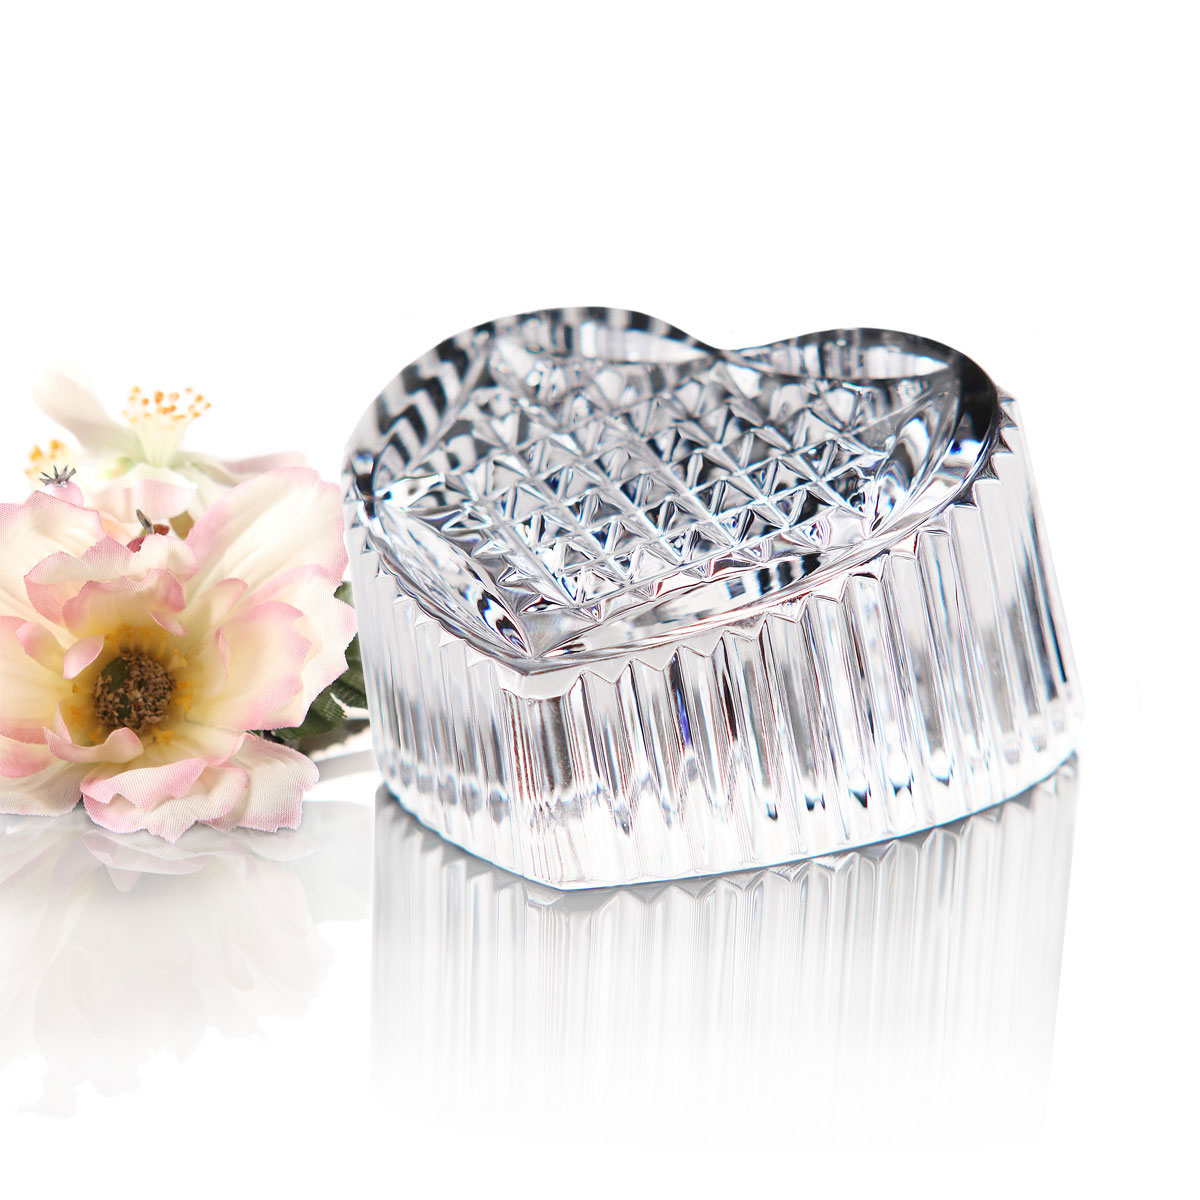 Waterford Crystal Heritage Heart Paperweight